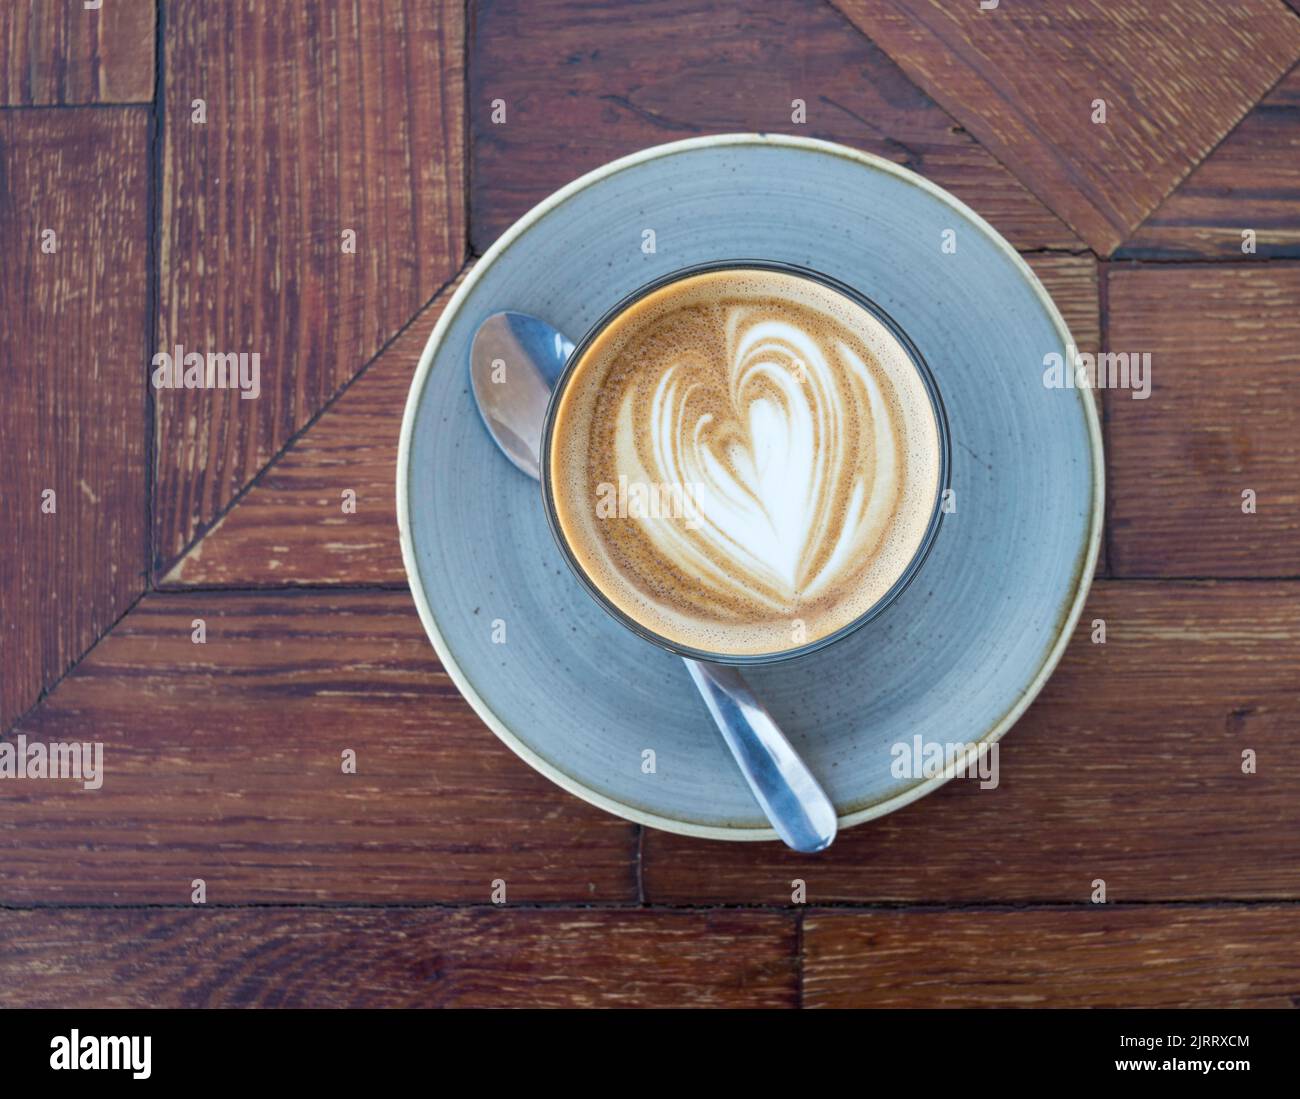 A cup of flat white coffee with saucer and spoon against a dark wood background Stock Photo